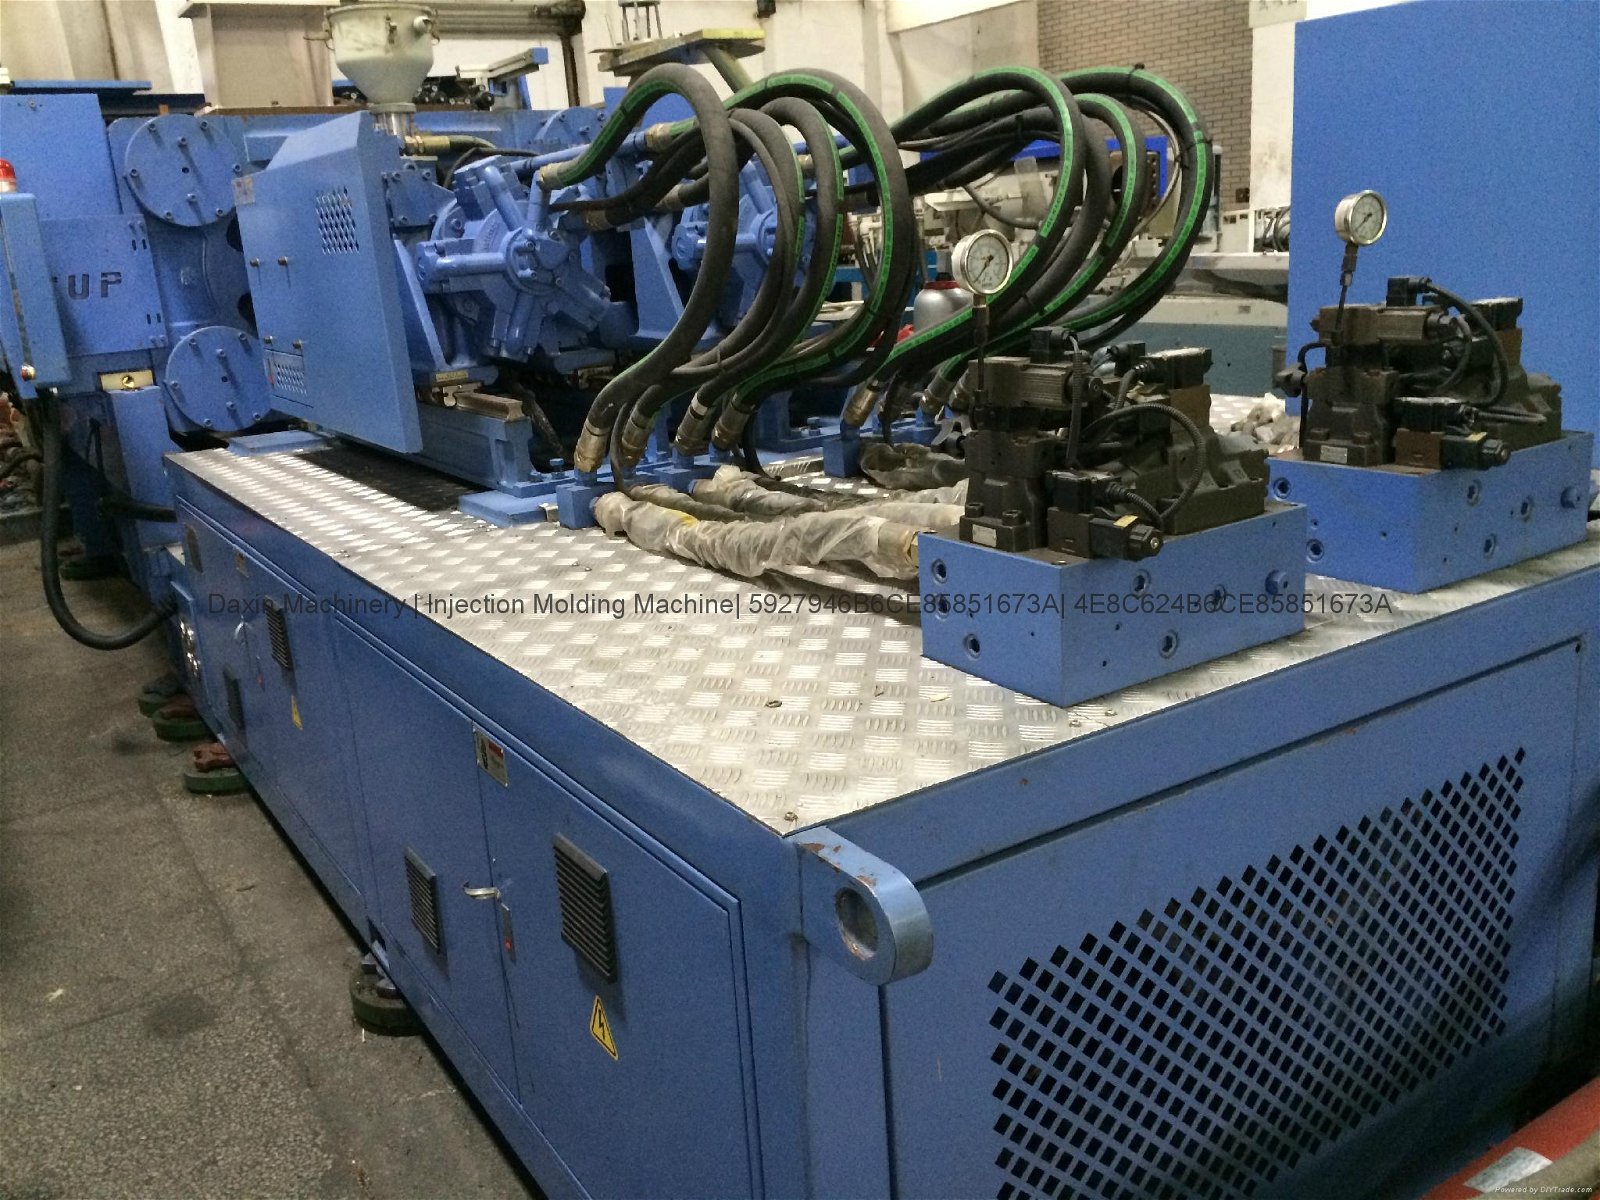 Union 600t Two Color used Injection Molding Machine 5